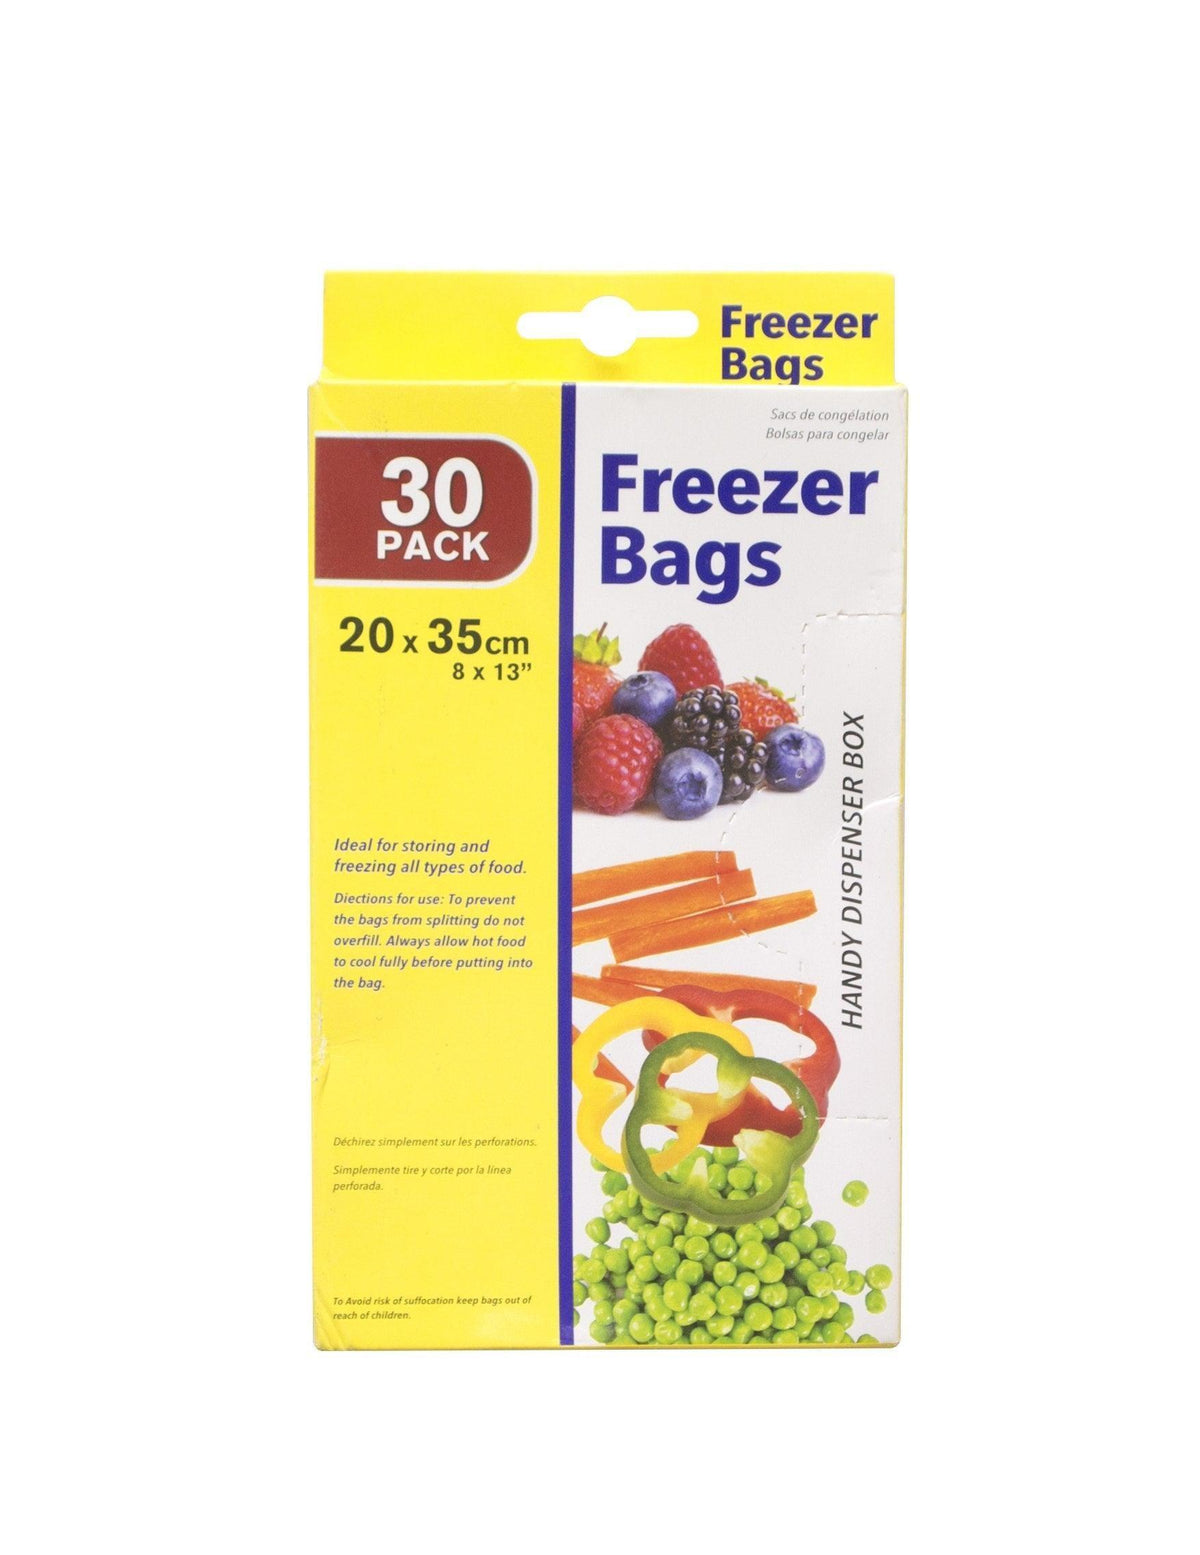 UBL Freeezer Bags Pack of 30 | 20 x 35cm - Choice Stores